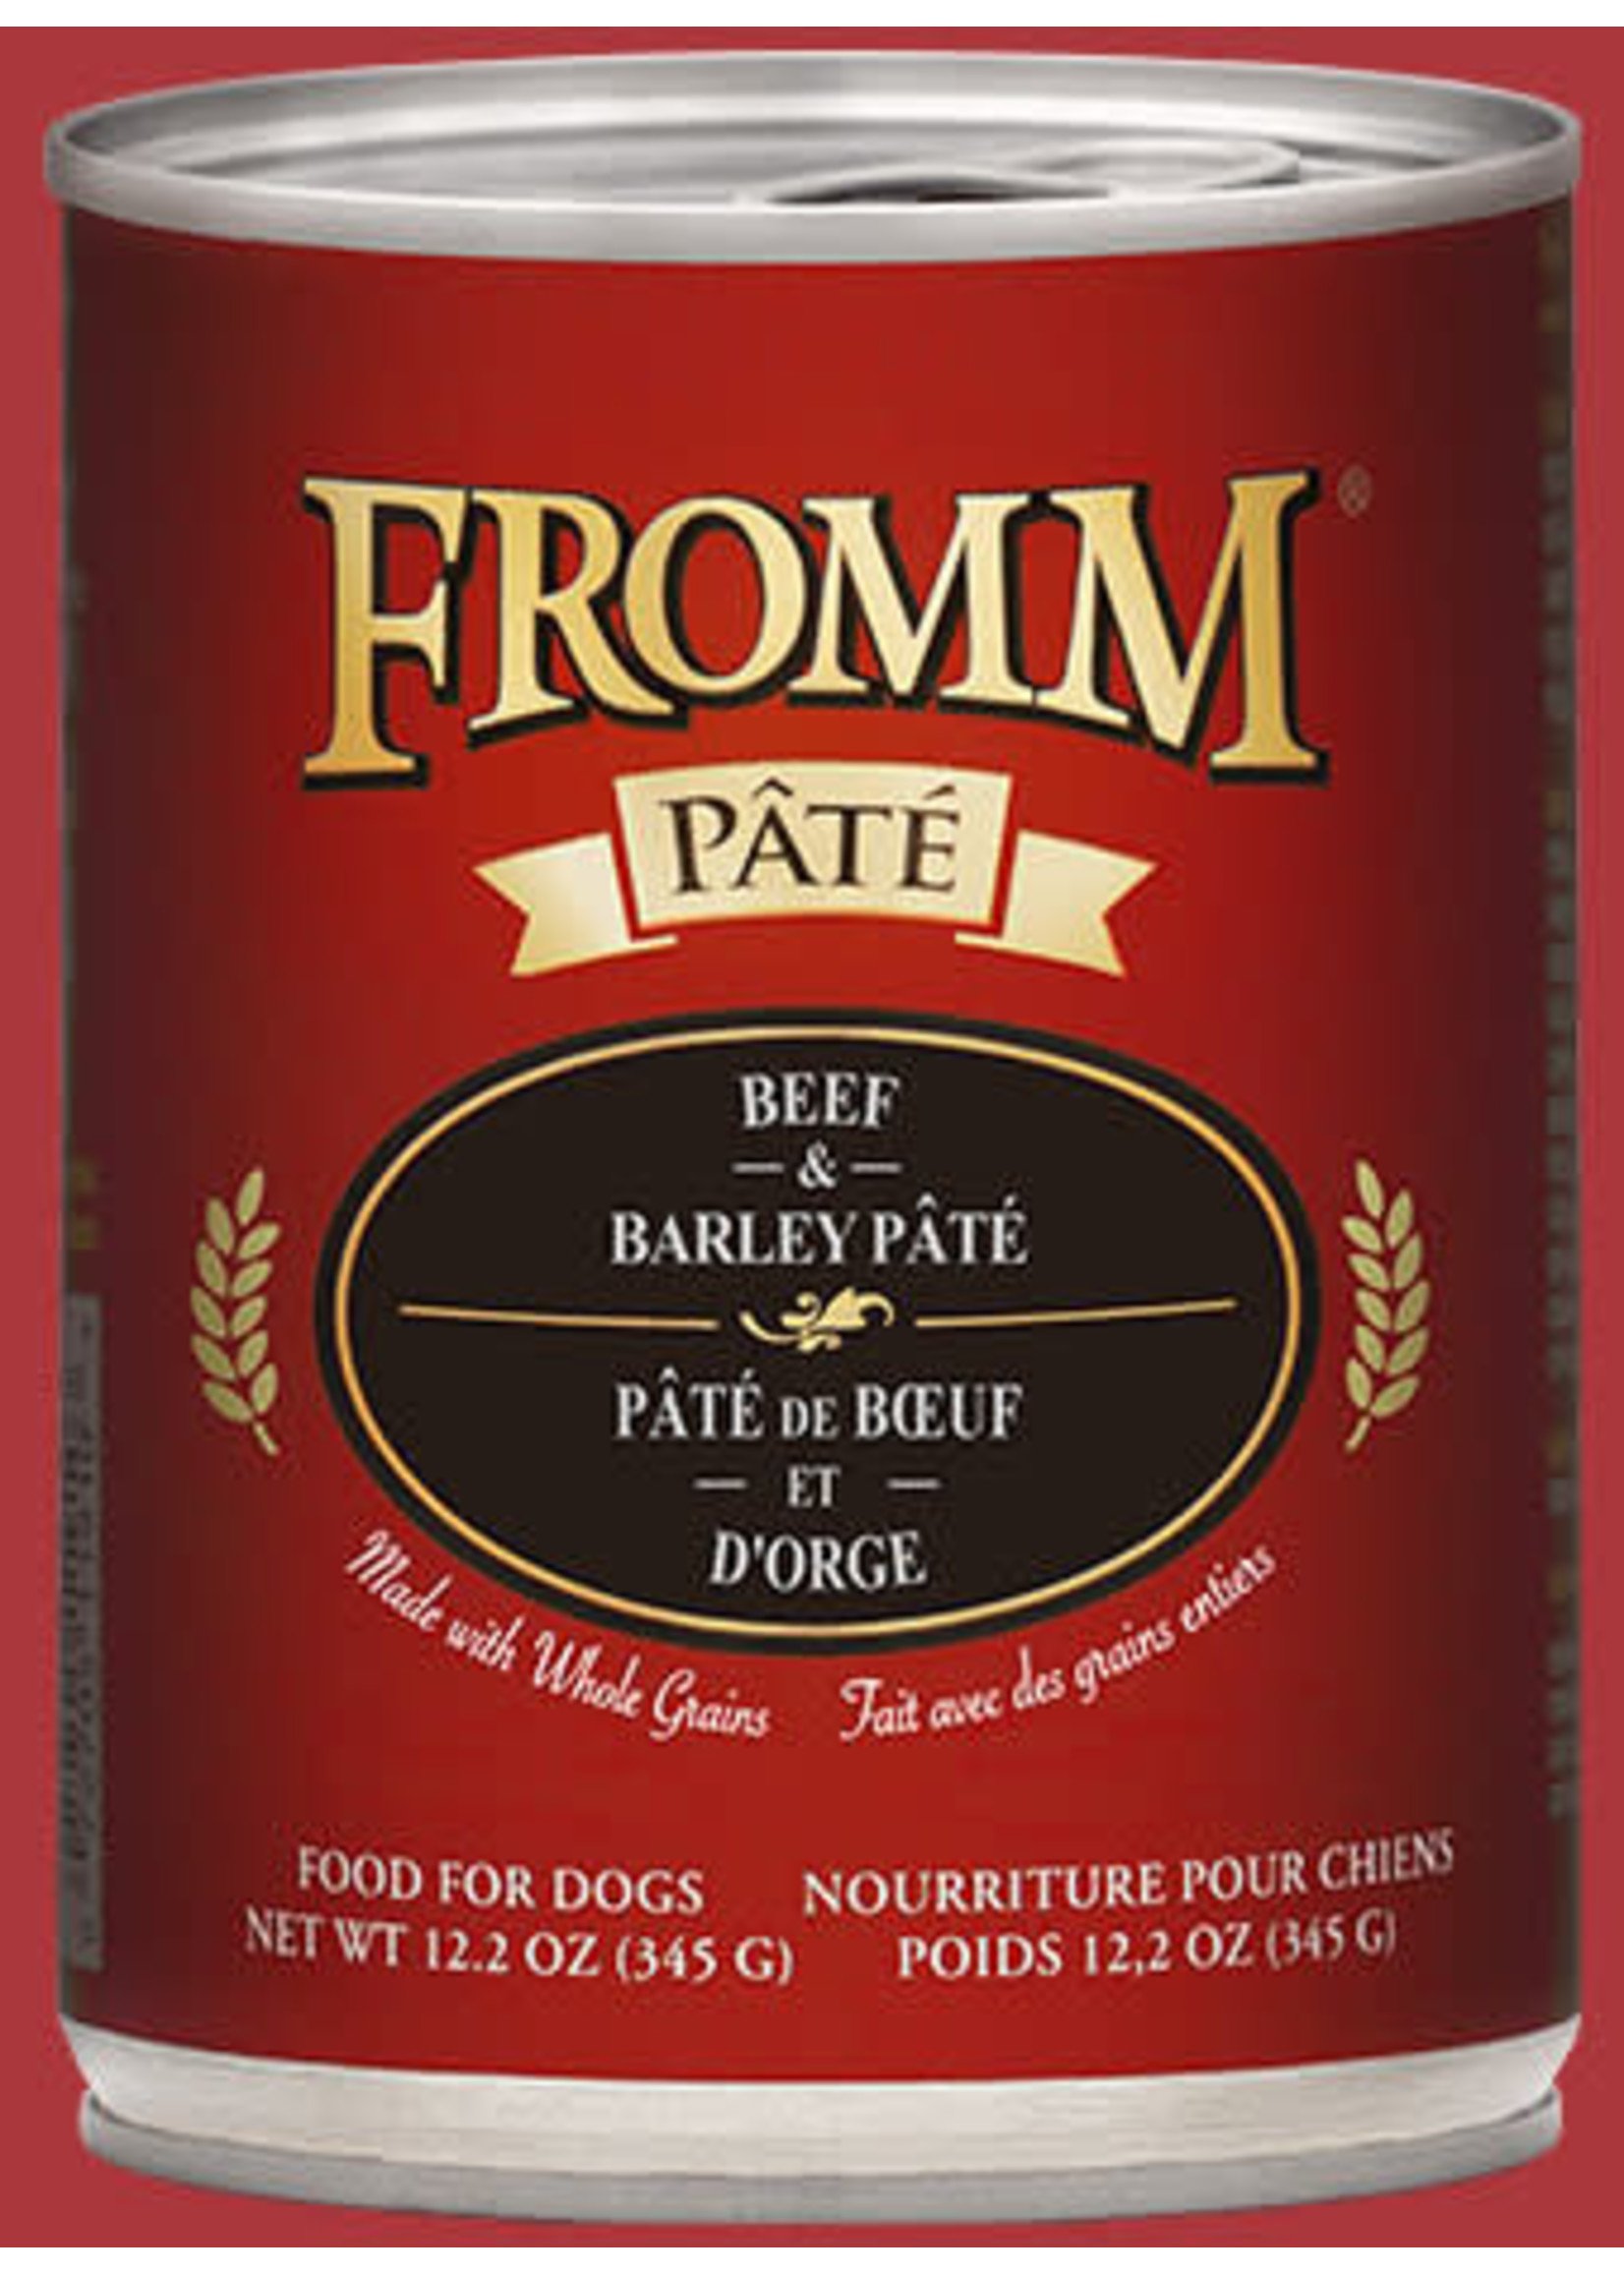 Fromm Family Beef & Barley Pate' 12.2 oz